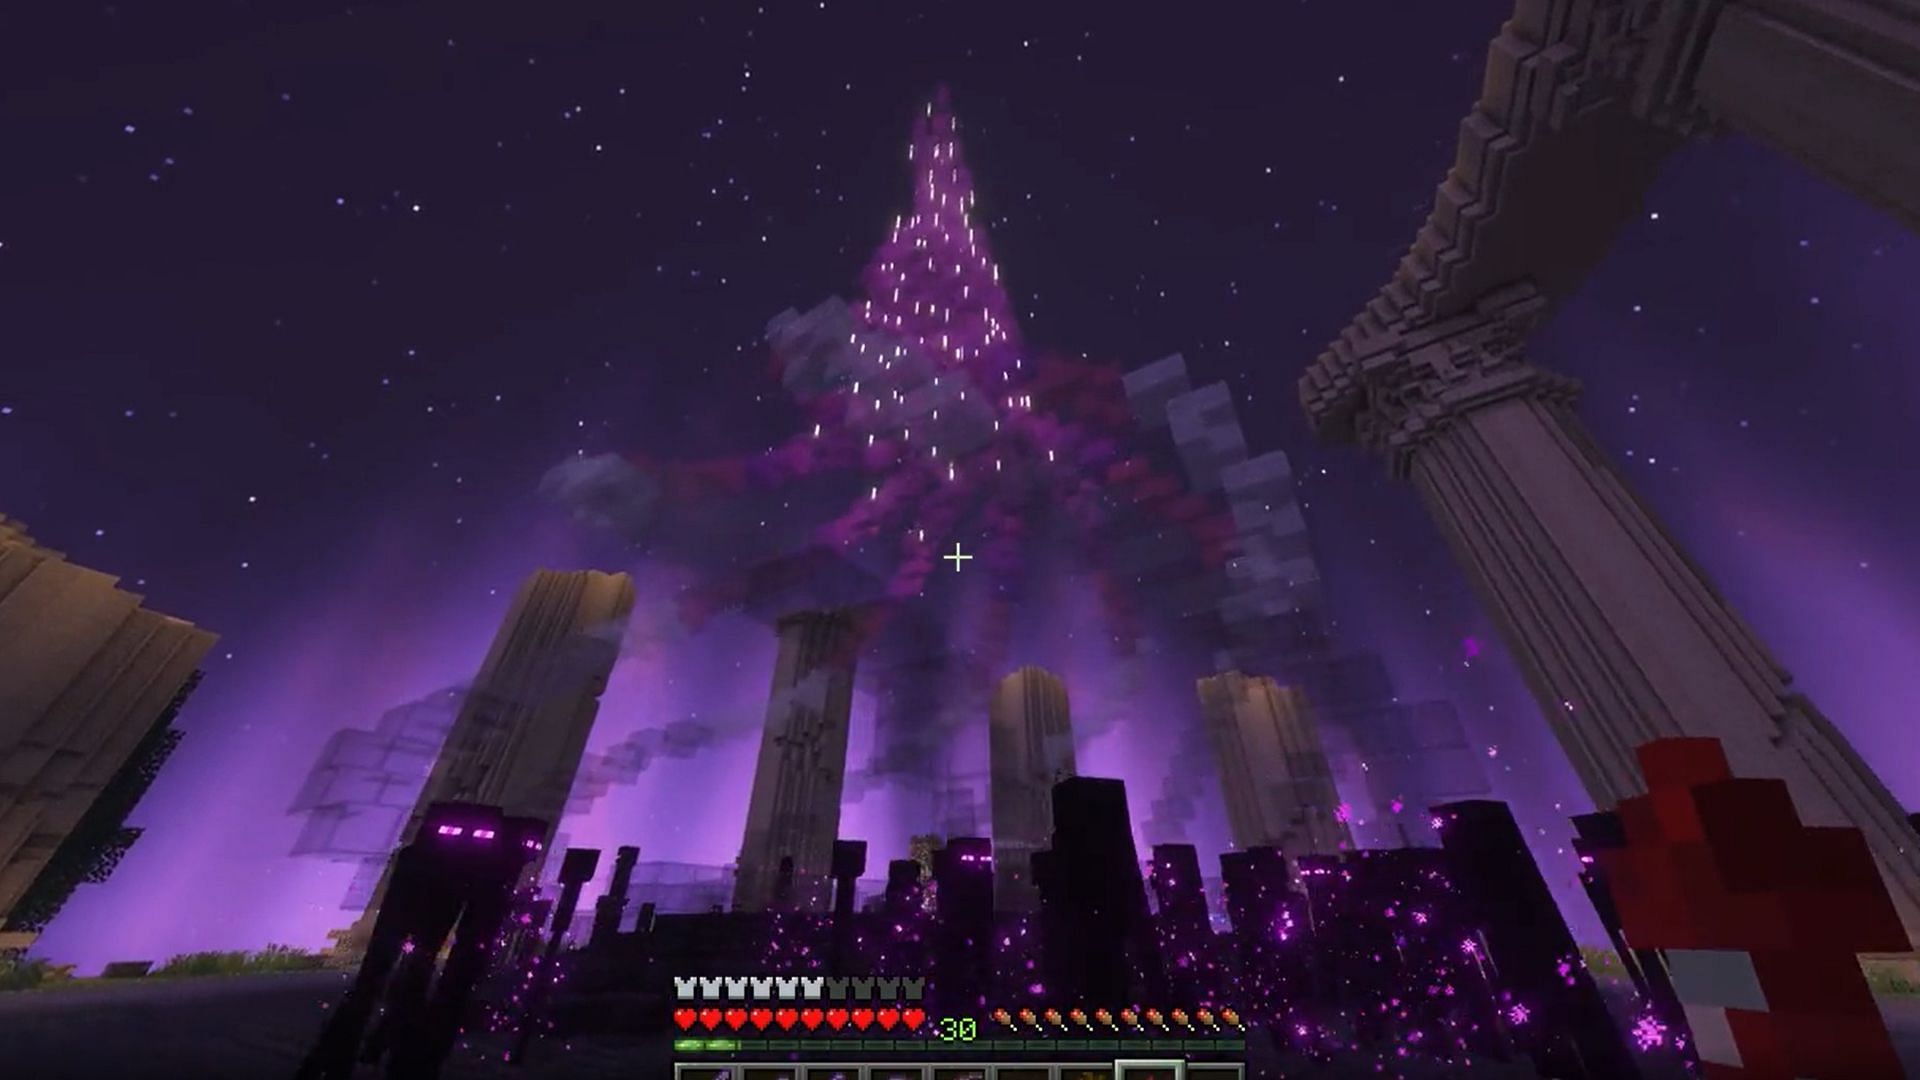 The Central area with massive structures in the End world of Minecraft (Image via Minecraft)